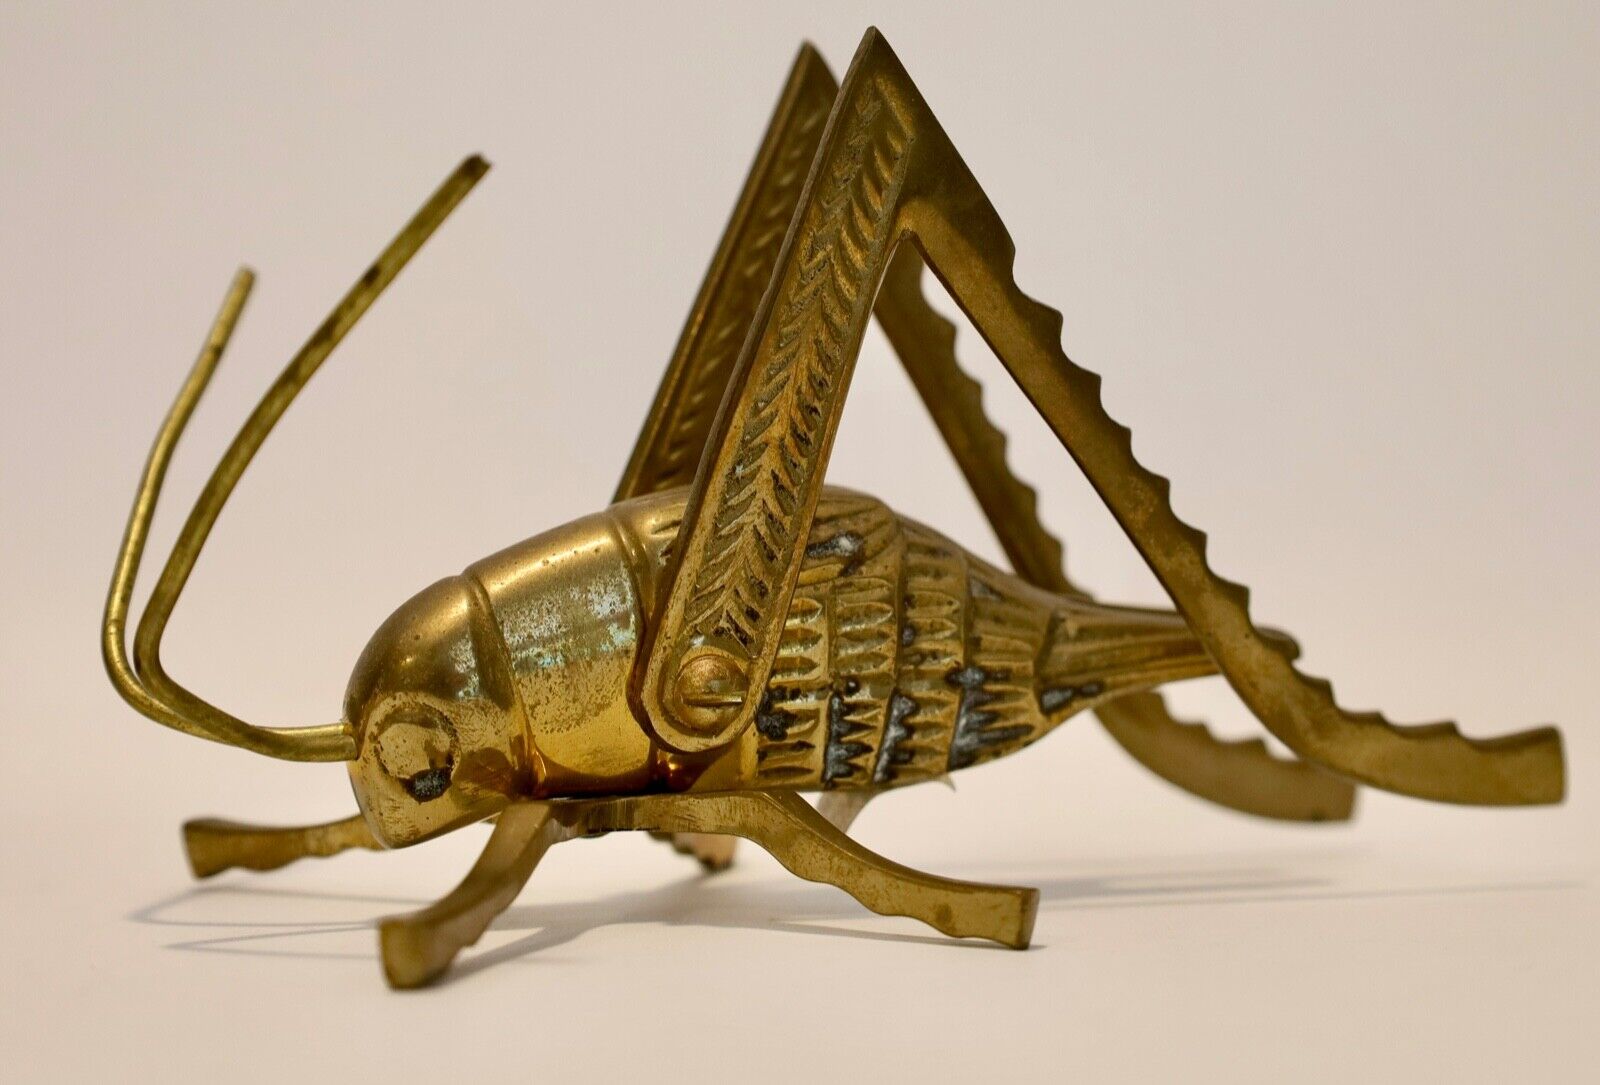 Brass Lucky Cricket or Grasshopper Figurine Moveable Legs Antenna Paperweight